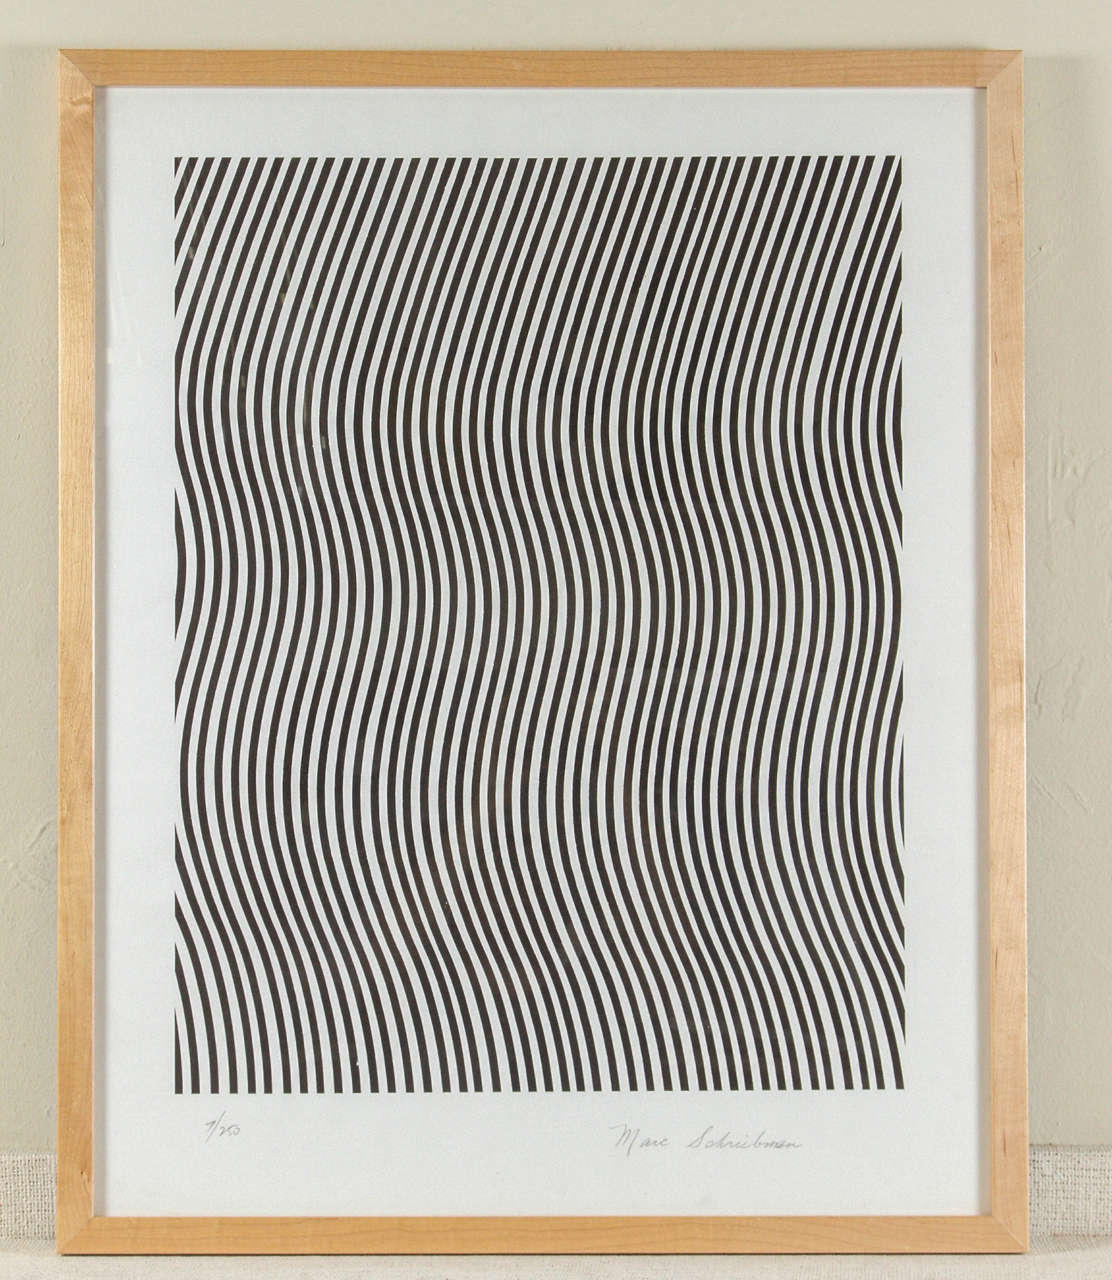 Black and white Op Art print from the 1970s. Signed March Schreibman. Numbered 7 of 250 maple frame.